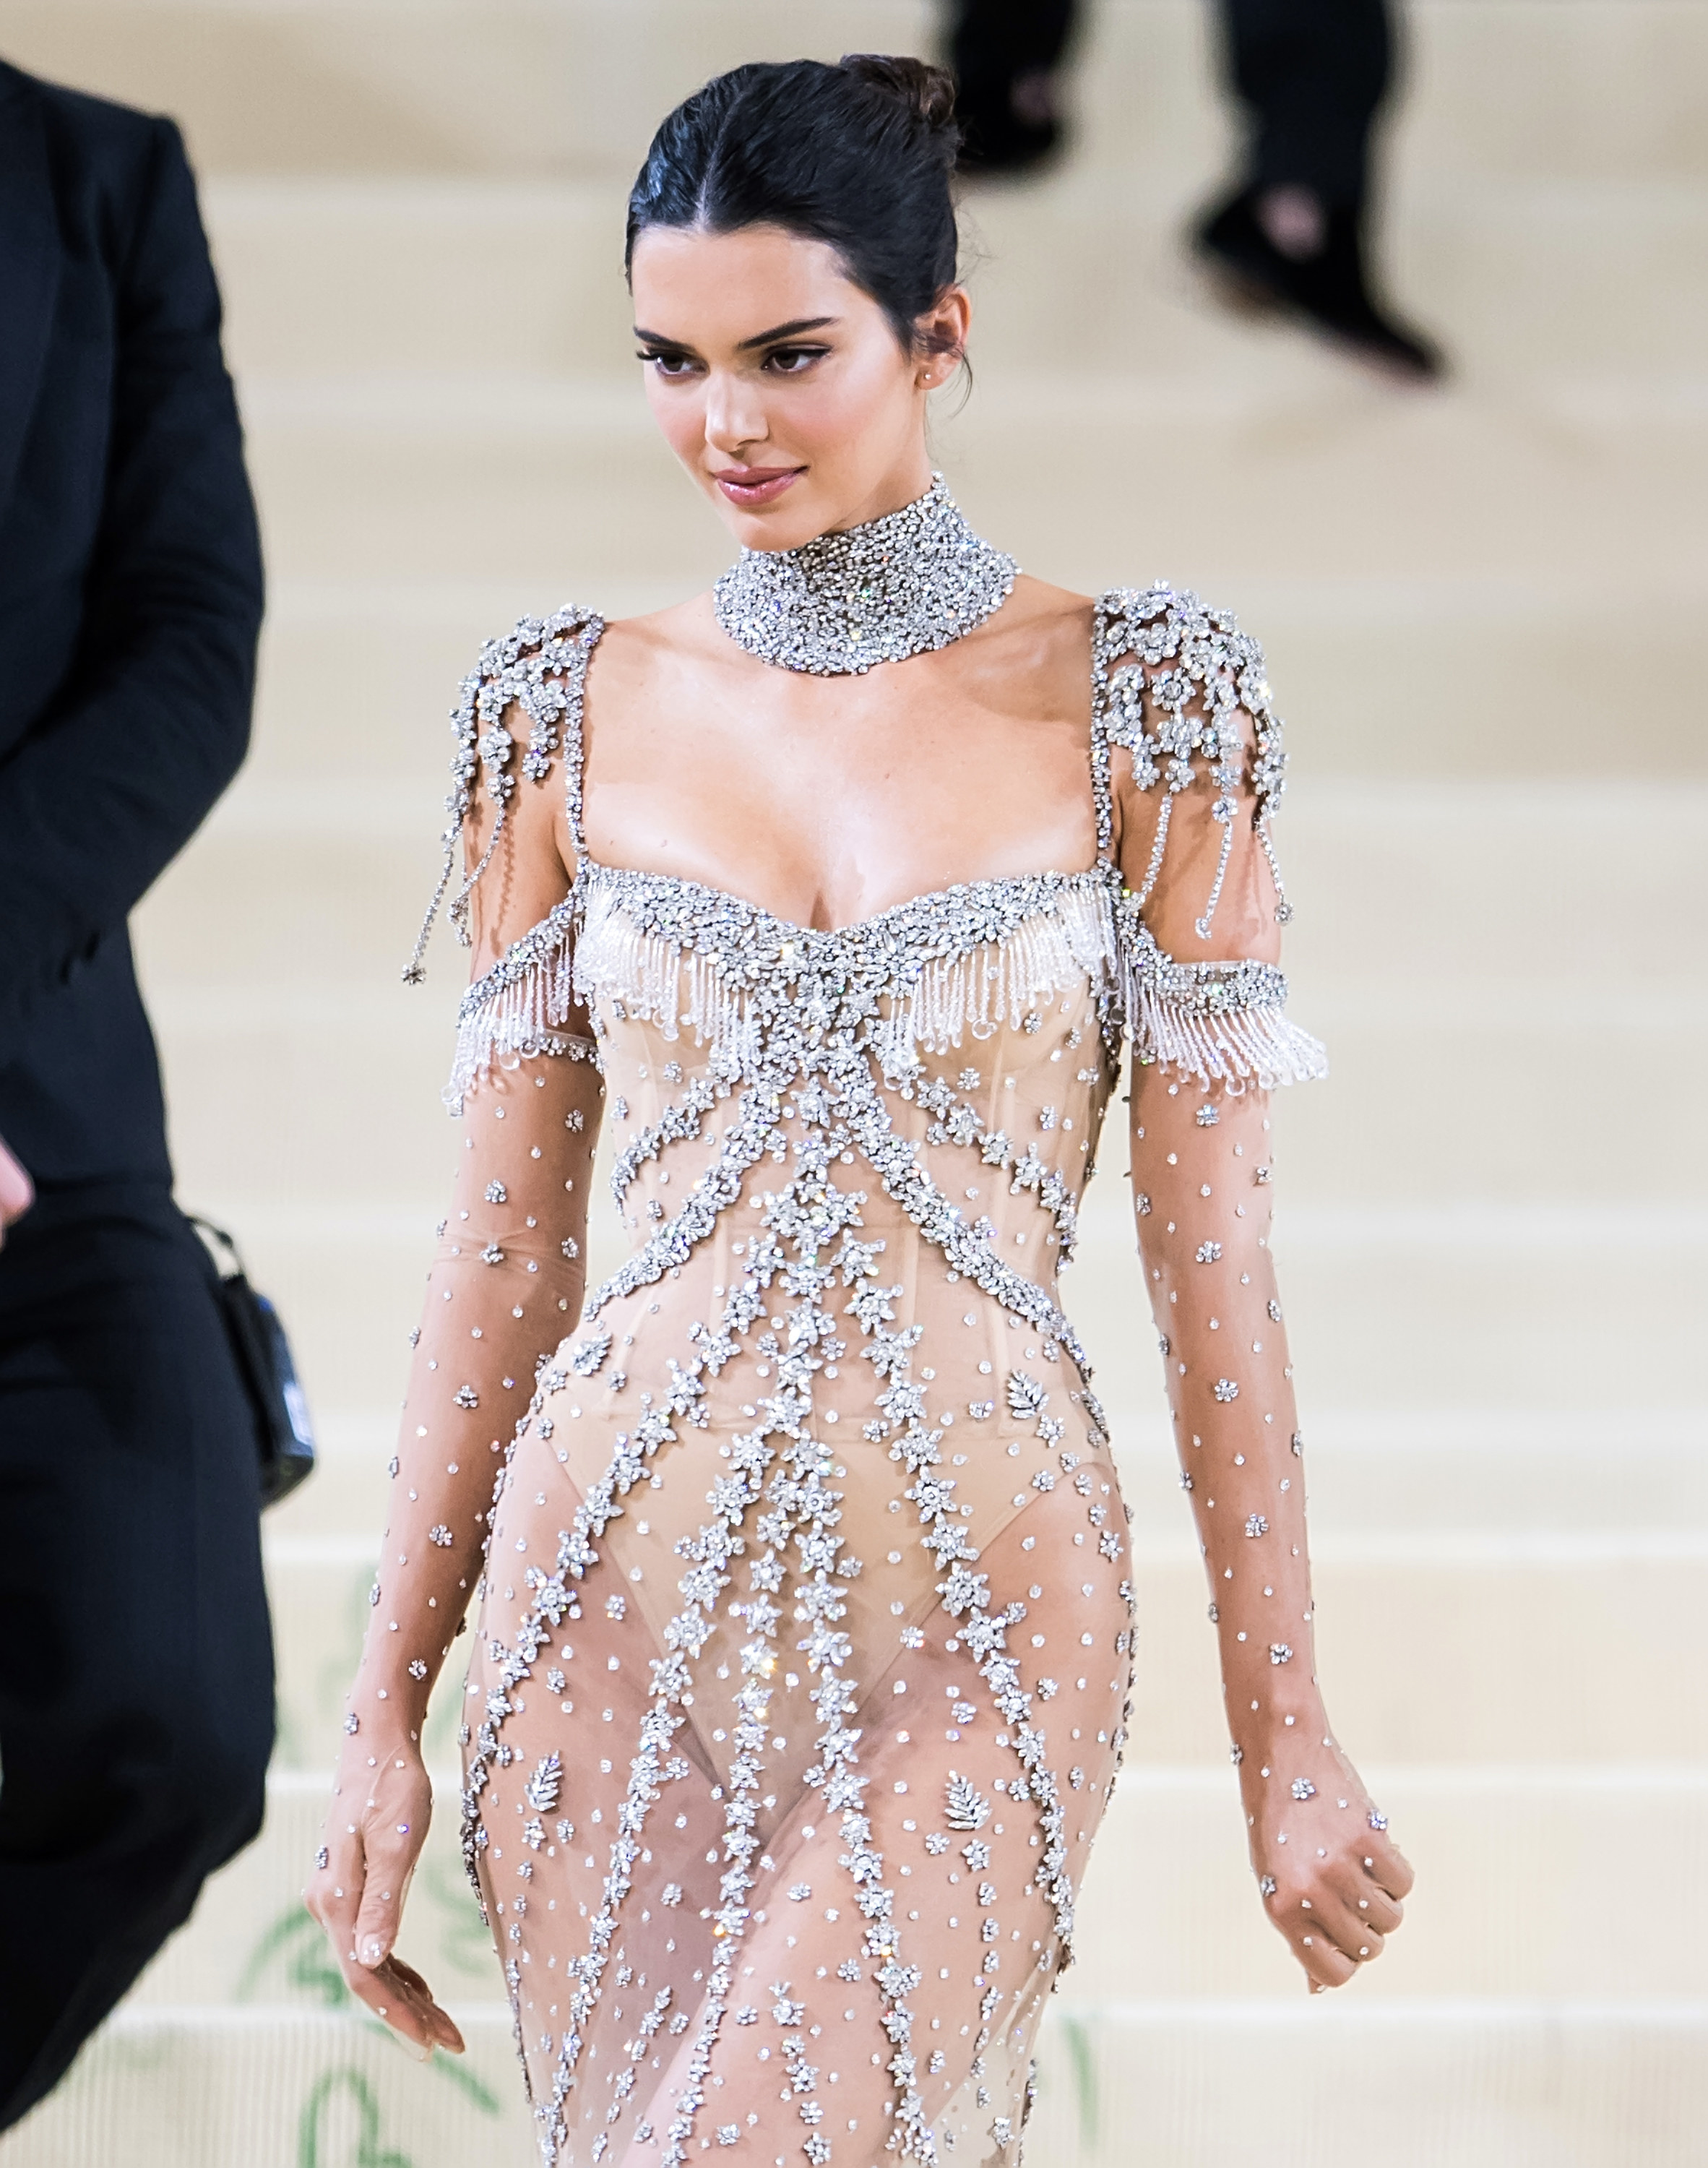 Kendall wears a sheer gown covered in diamonds with a nude bodysuit underneath